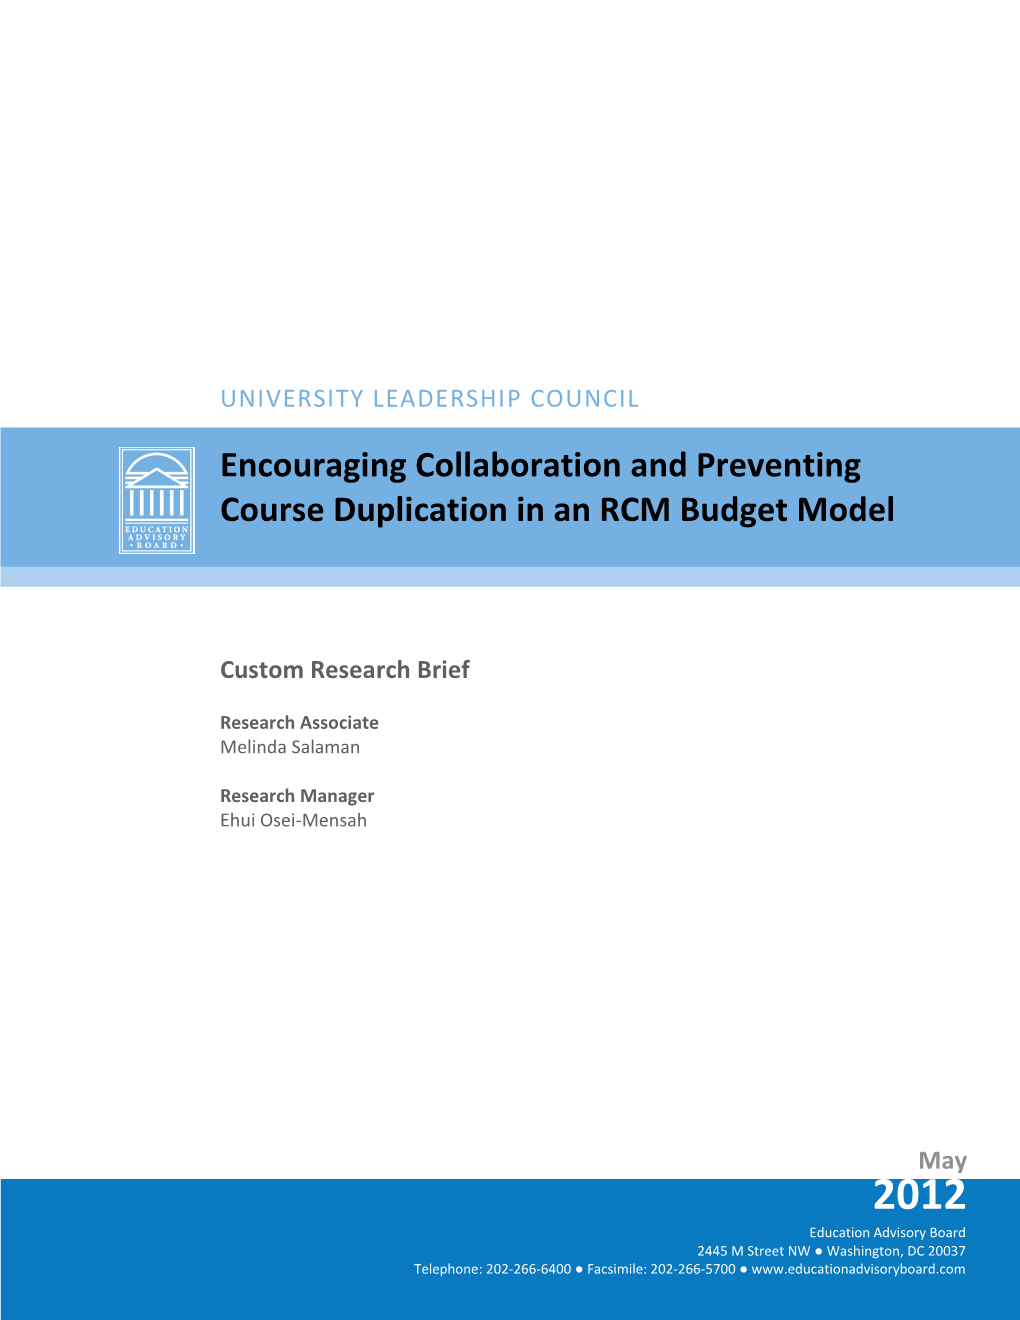 Encouraging Collaboration and Preventing Course Duplication in an RCM Budget Model